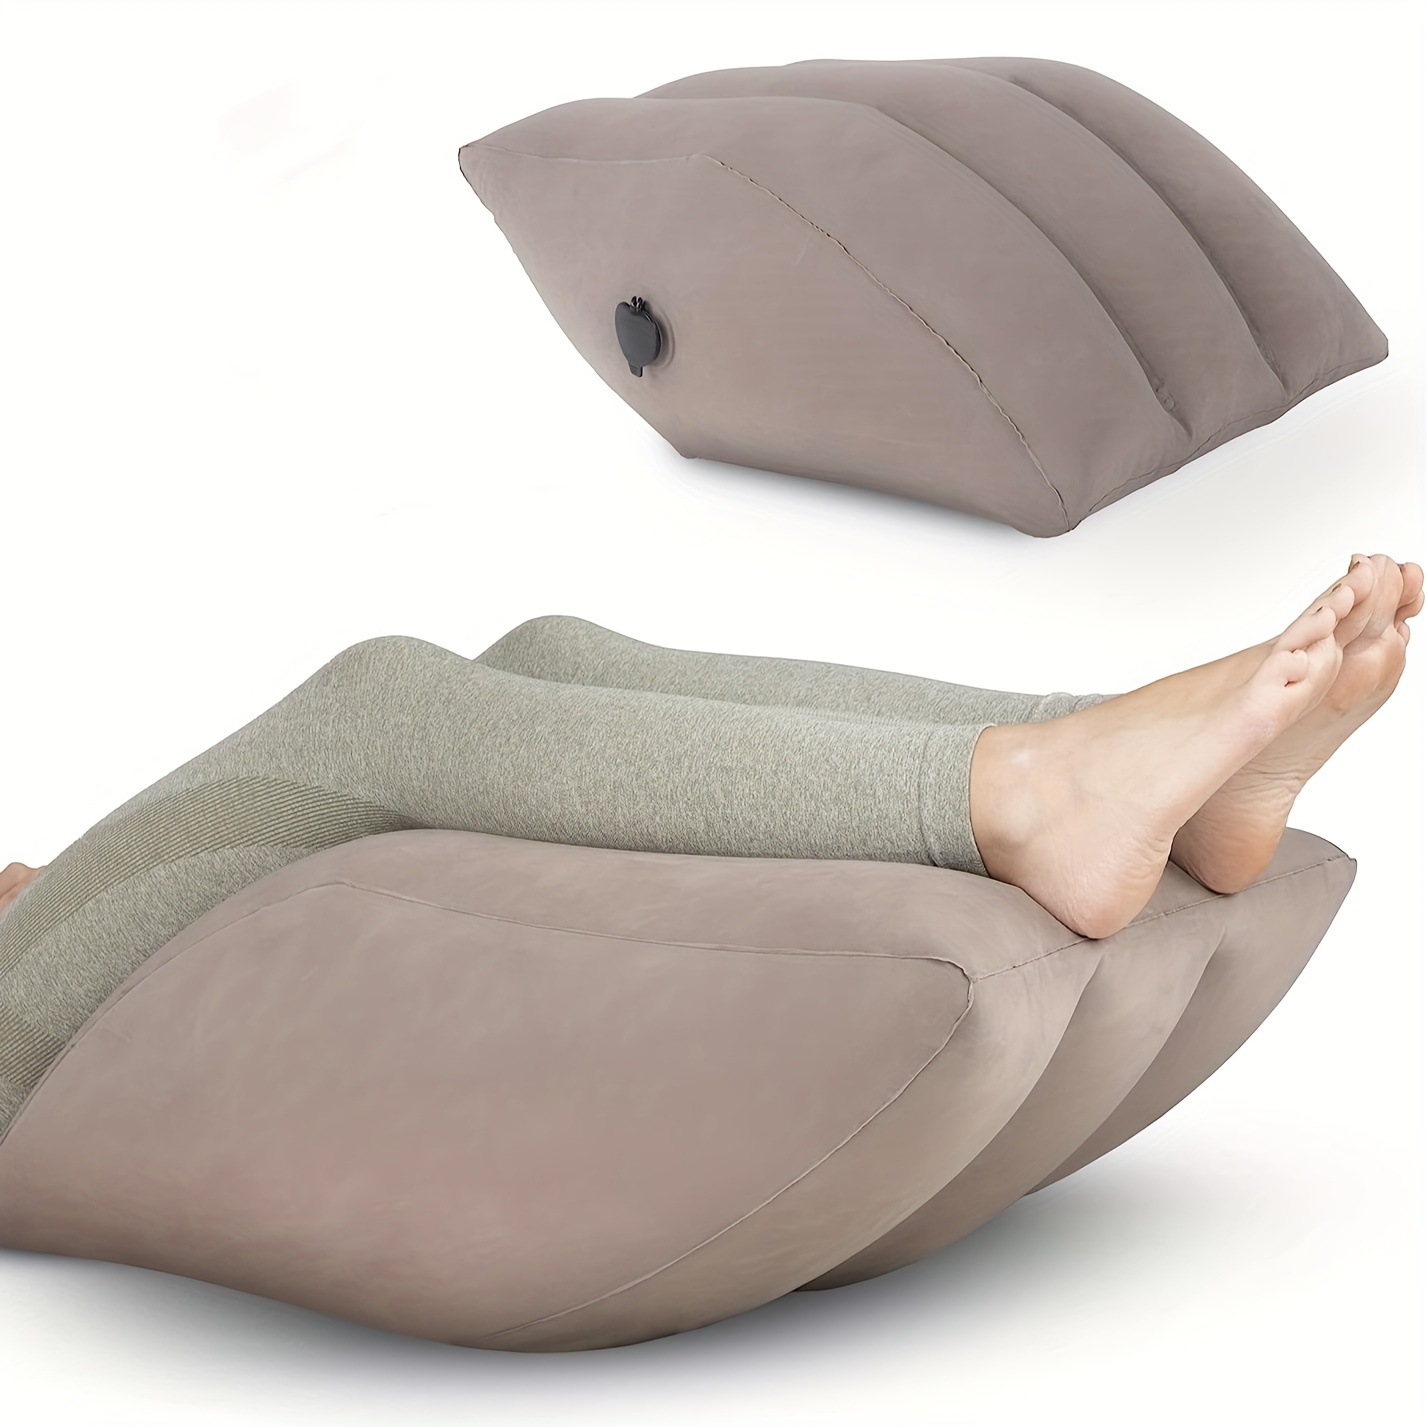 Leg Elevation Pillow with Memory Foam Top - Elevated Leg Rest